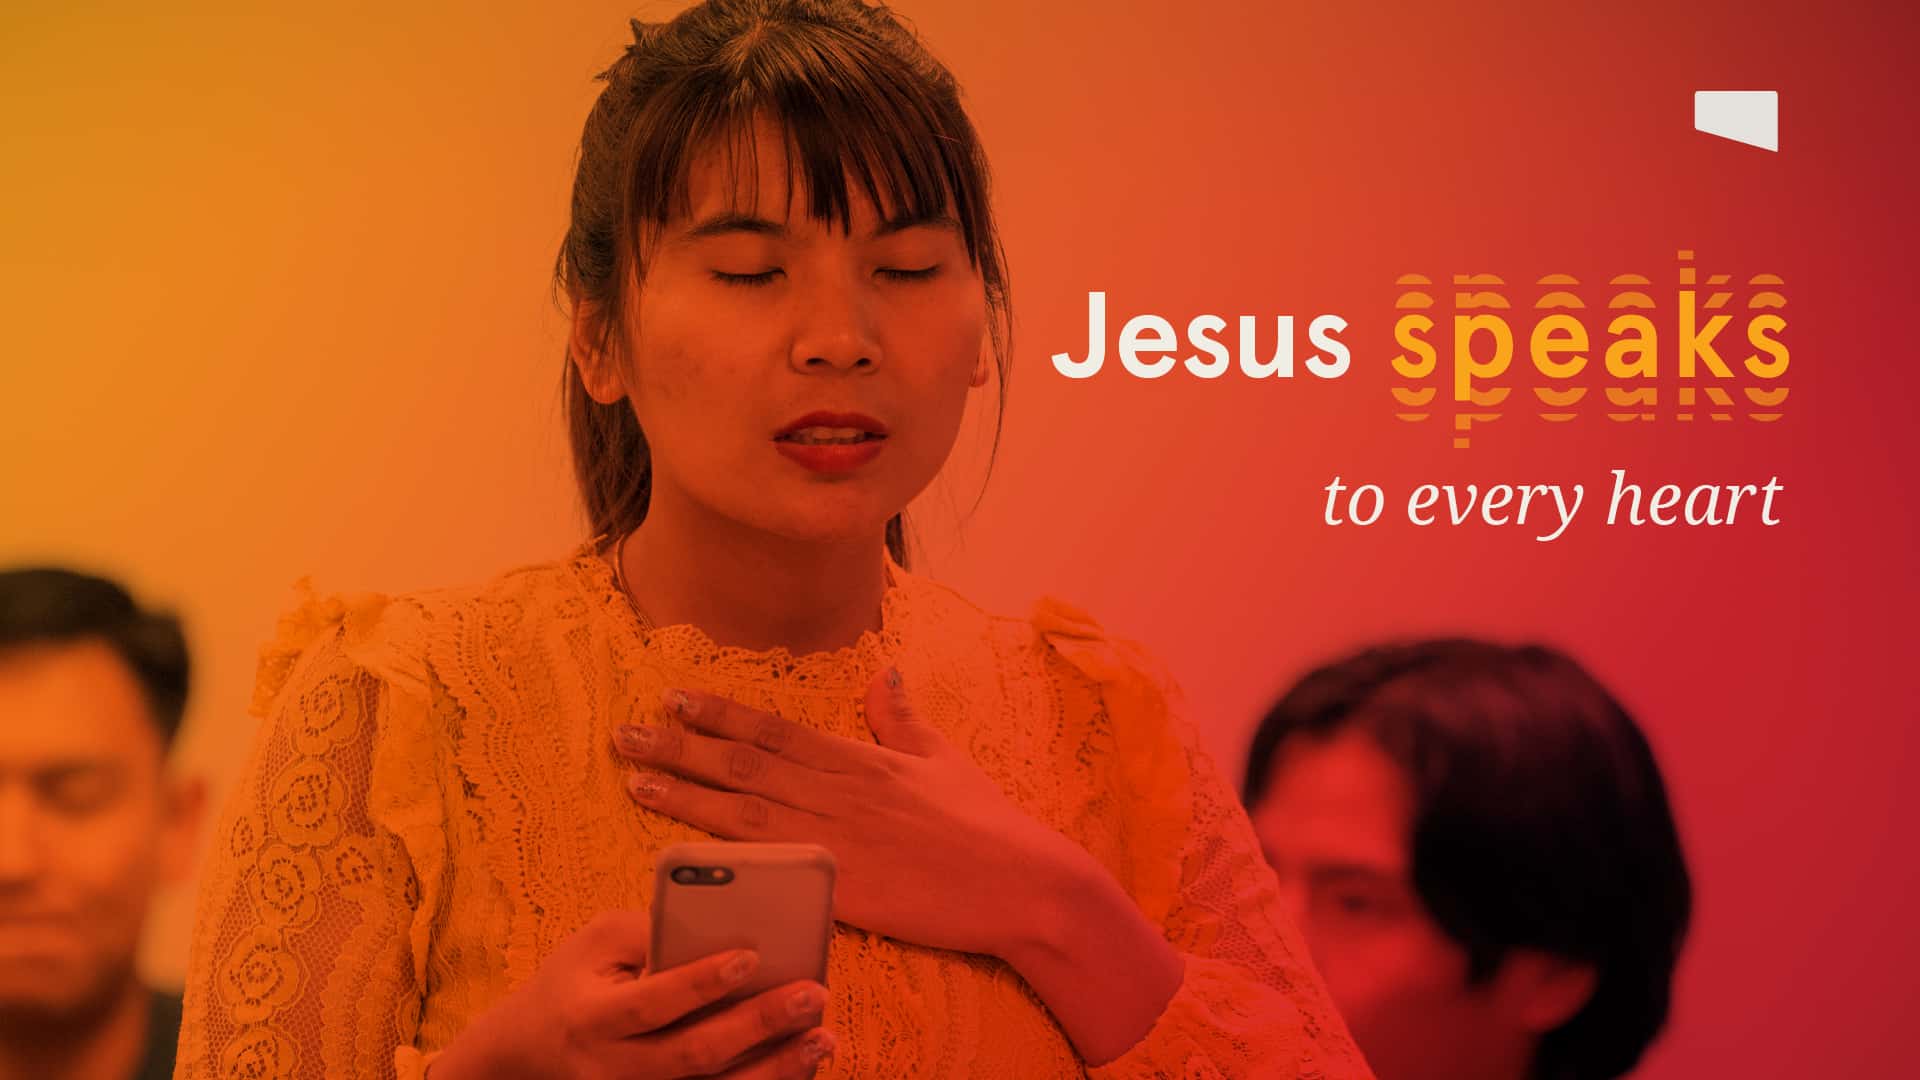 Jesus Film Project - An Christian Media Ministry